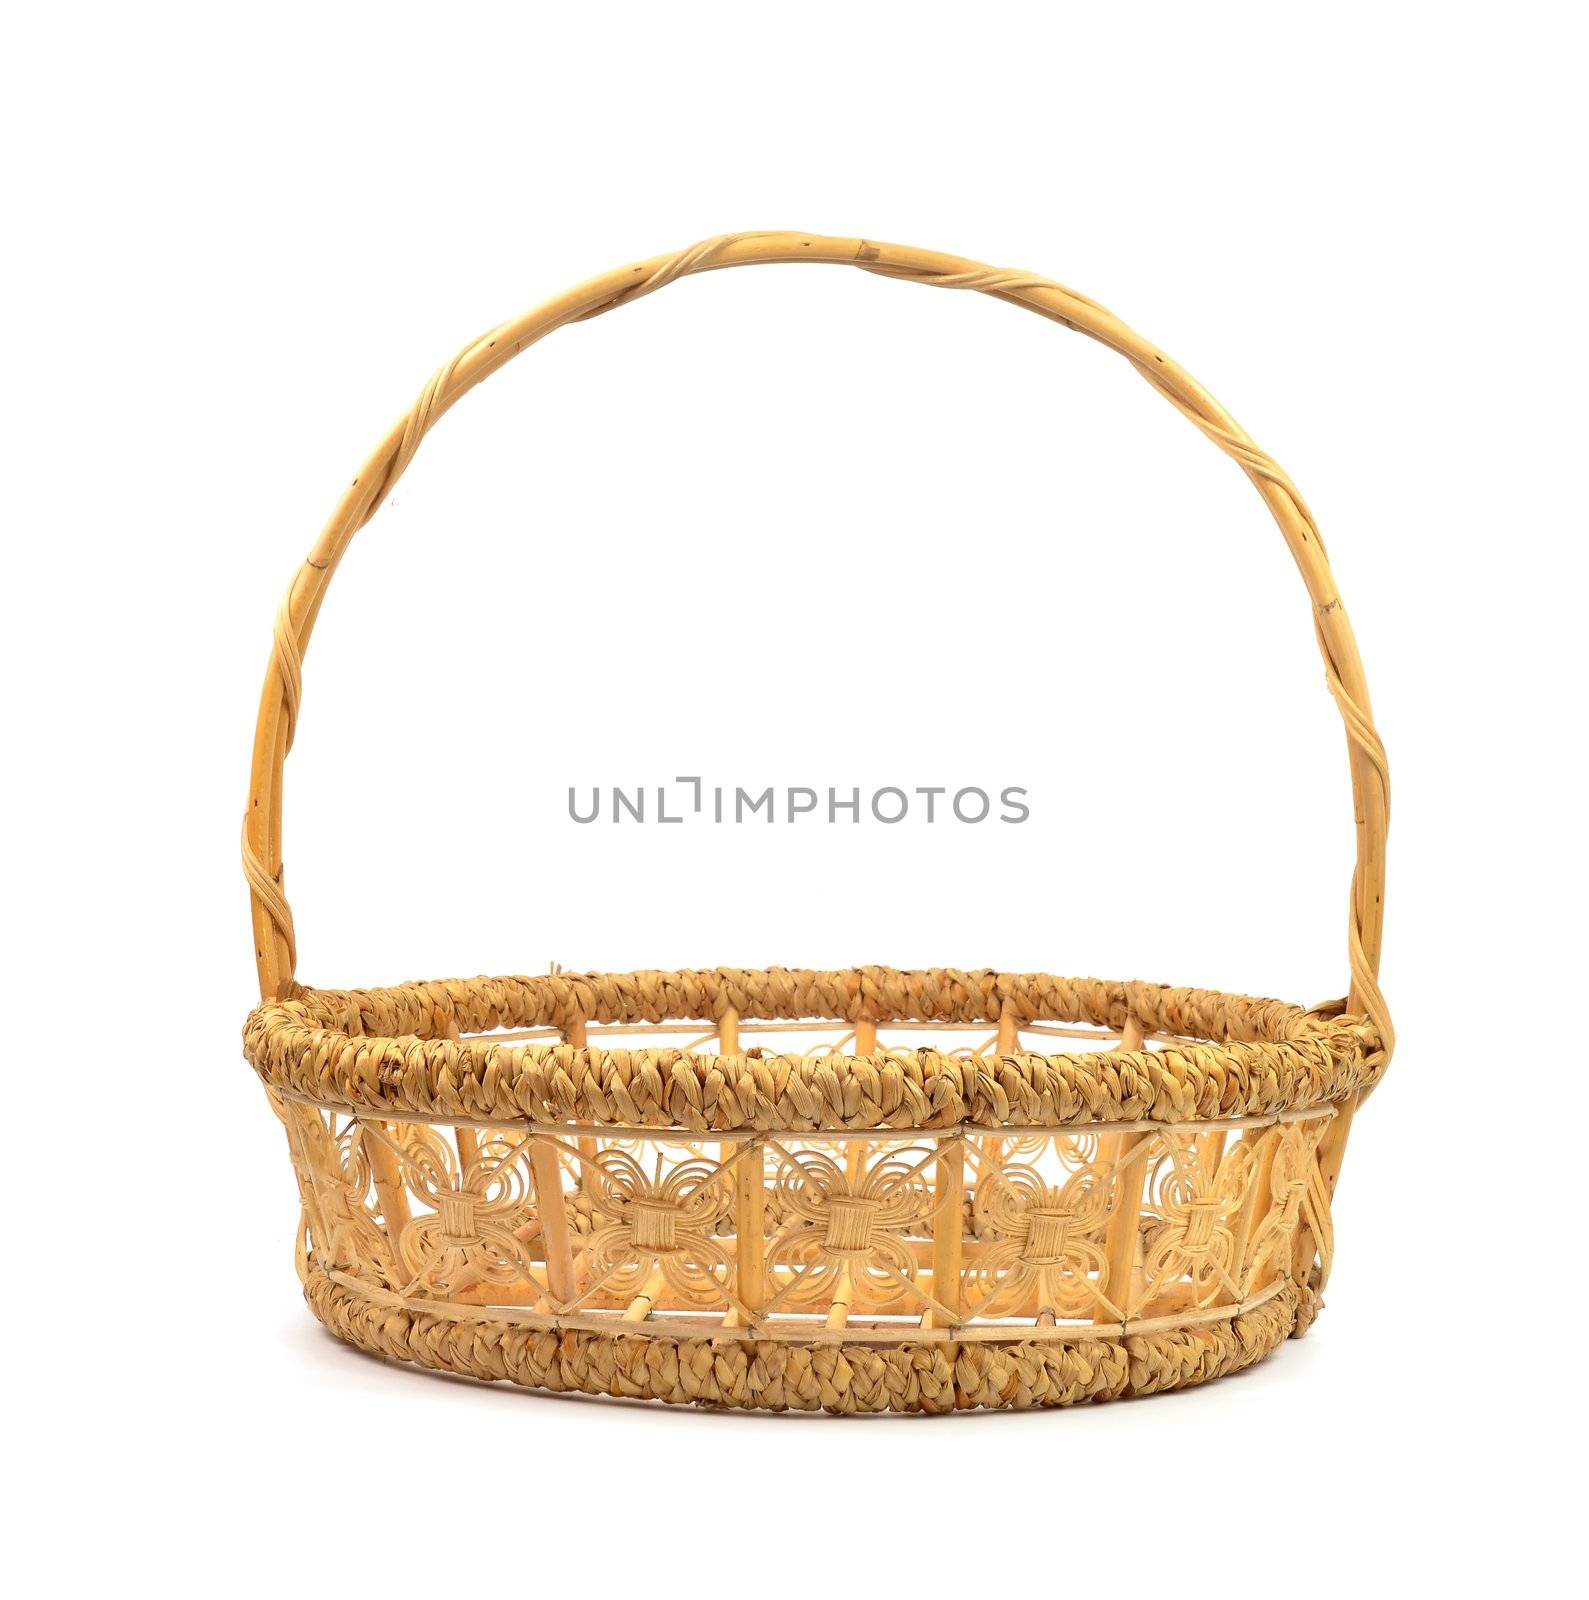 basket made from bamboo and reed